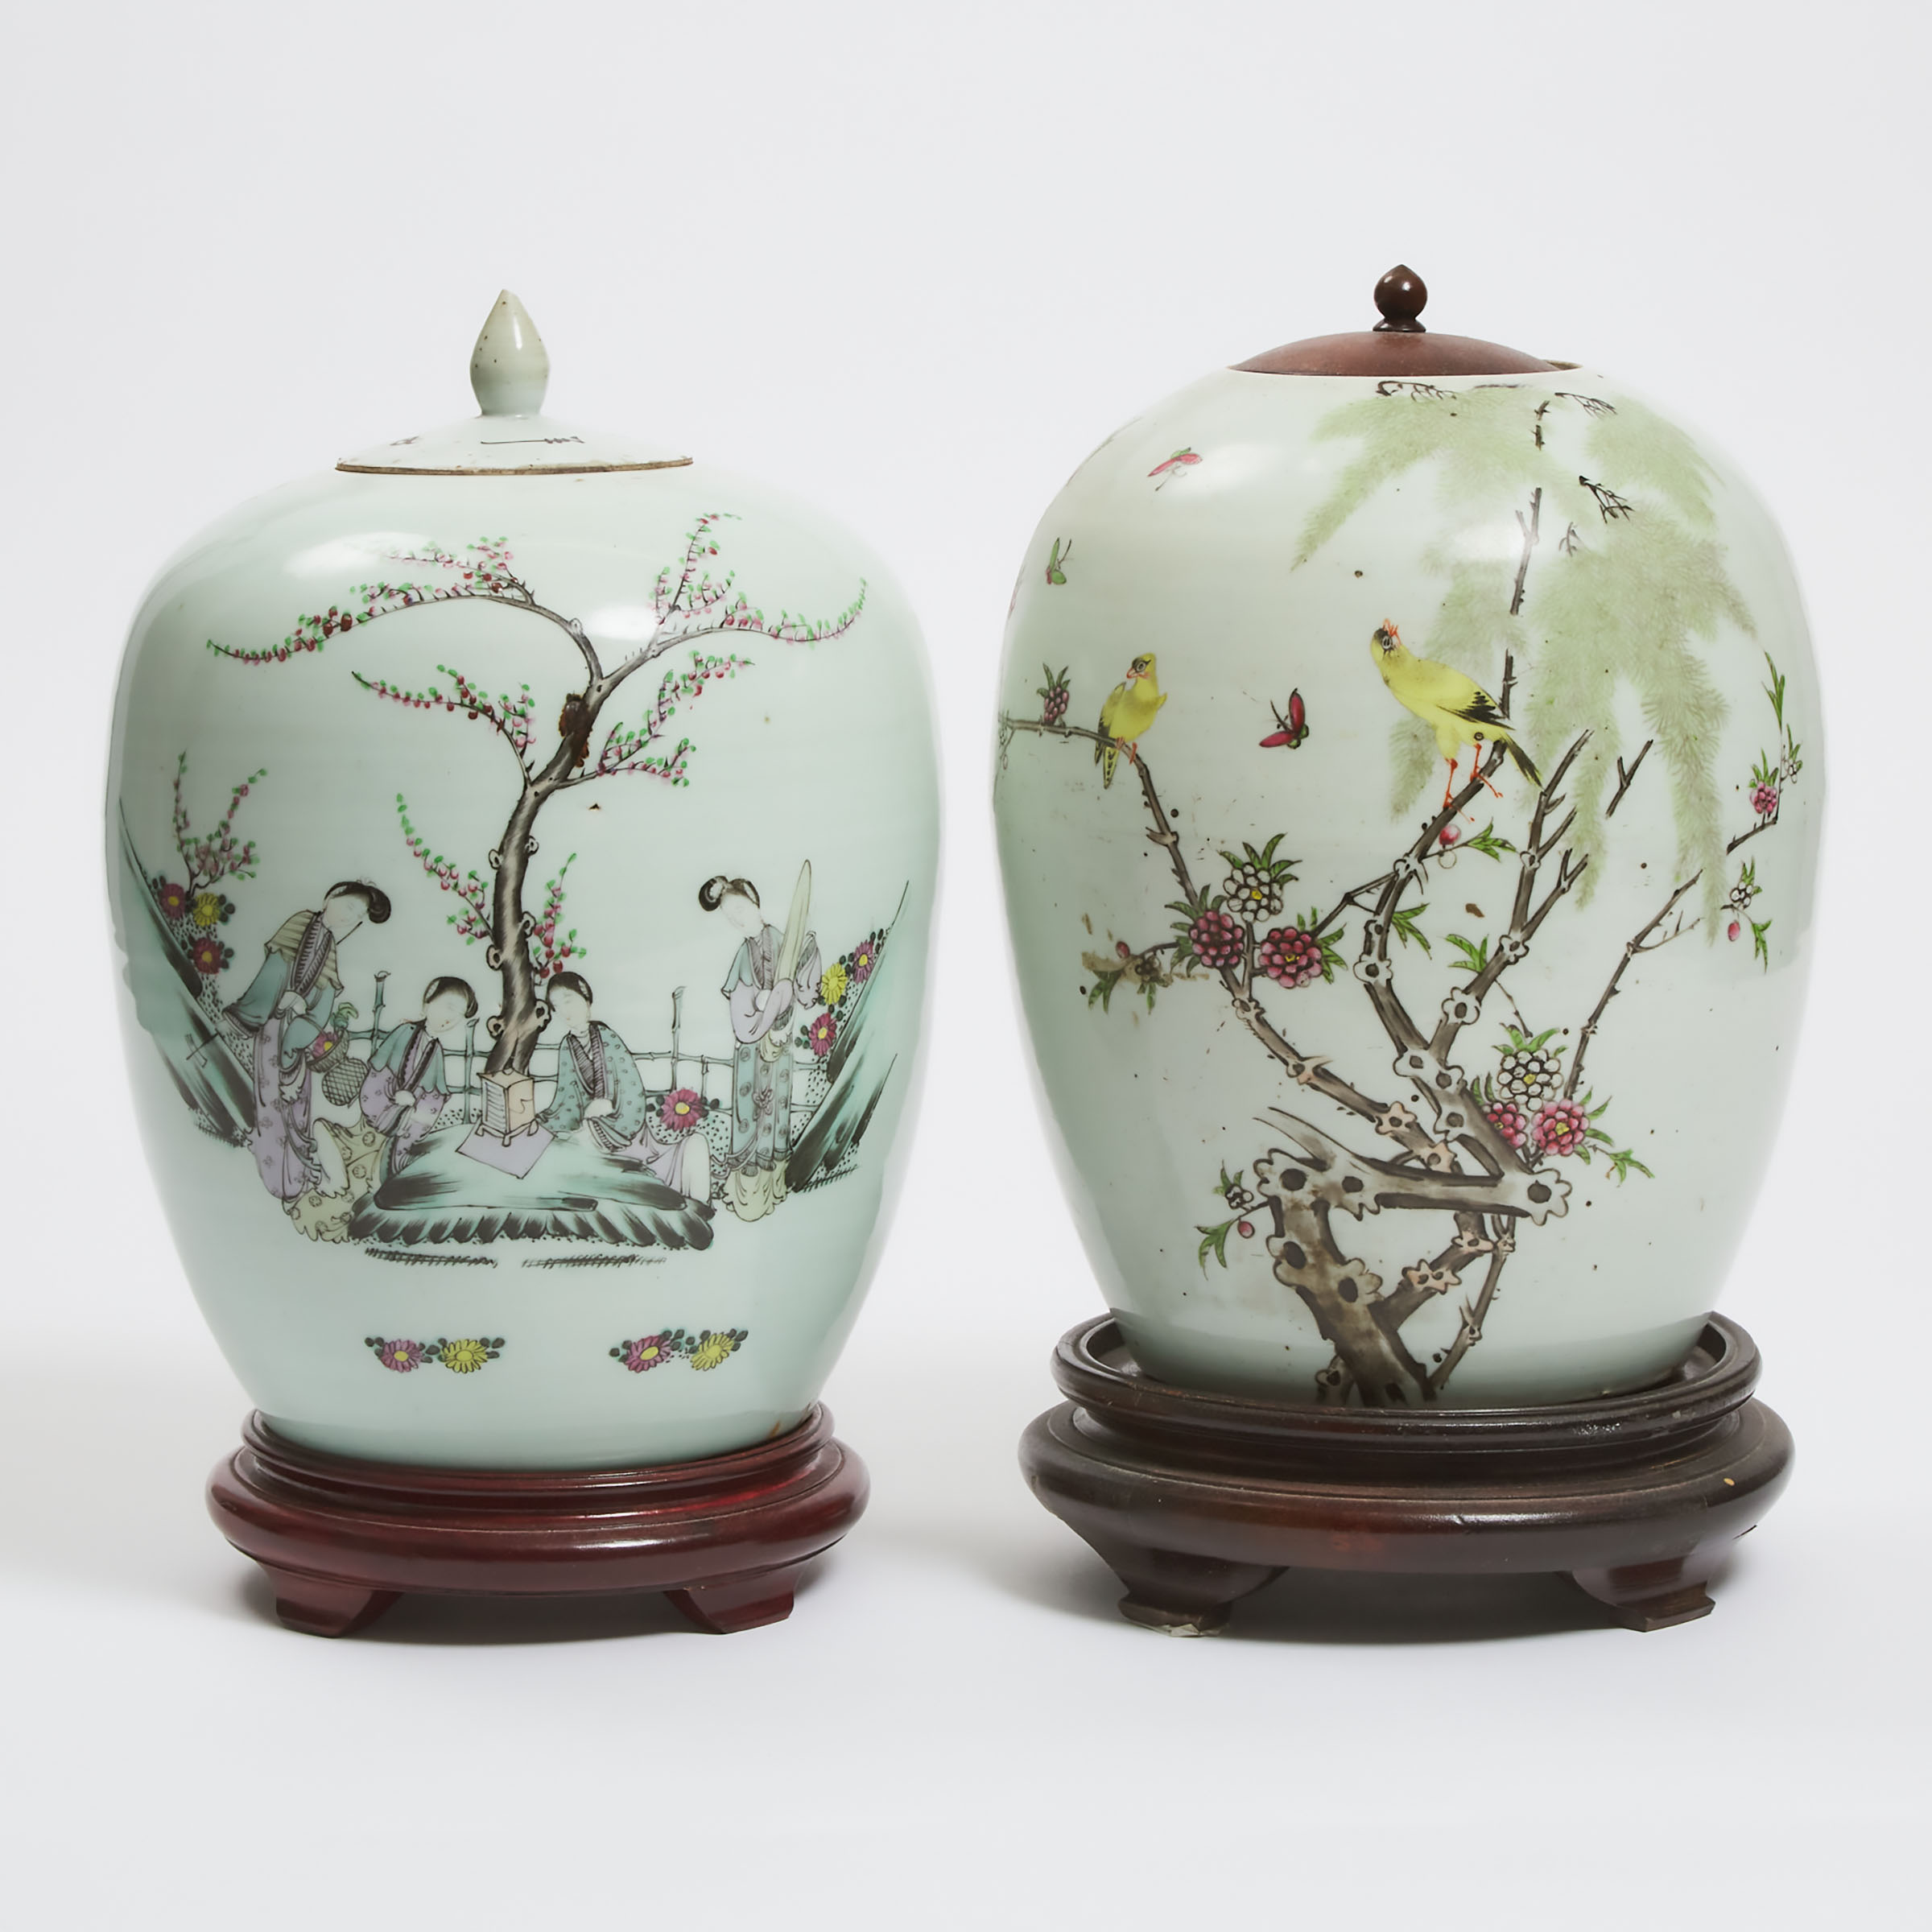 Two Enameled Porcelain Jars With Covers, Republican Period